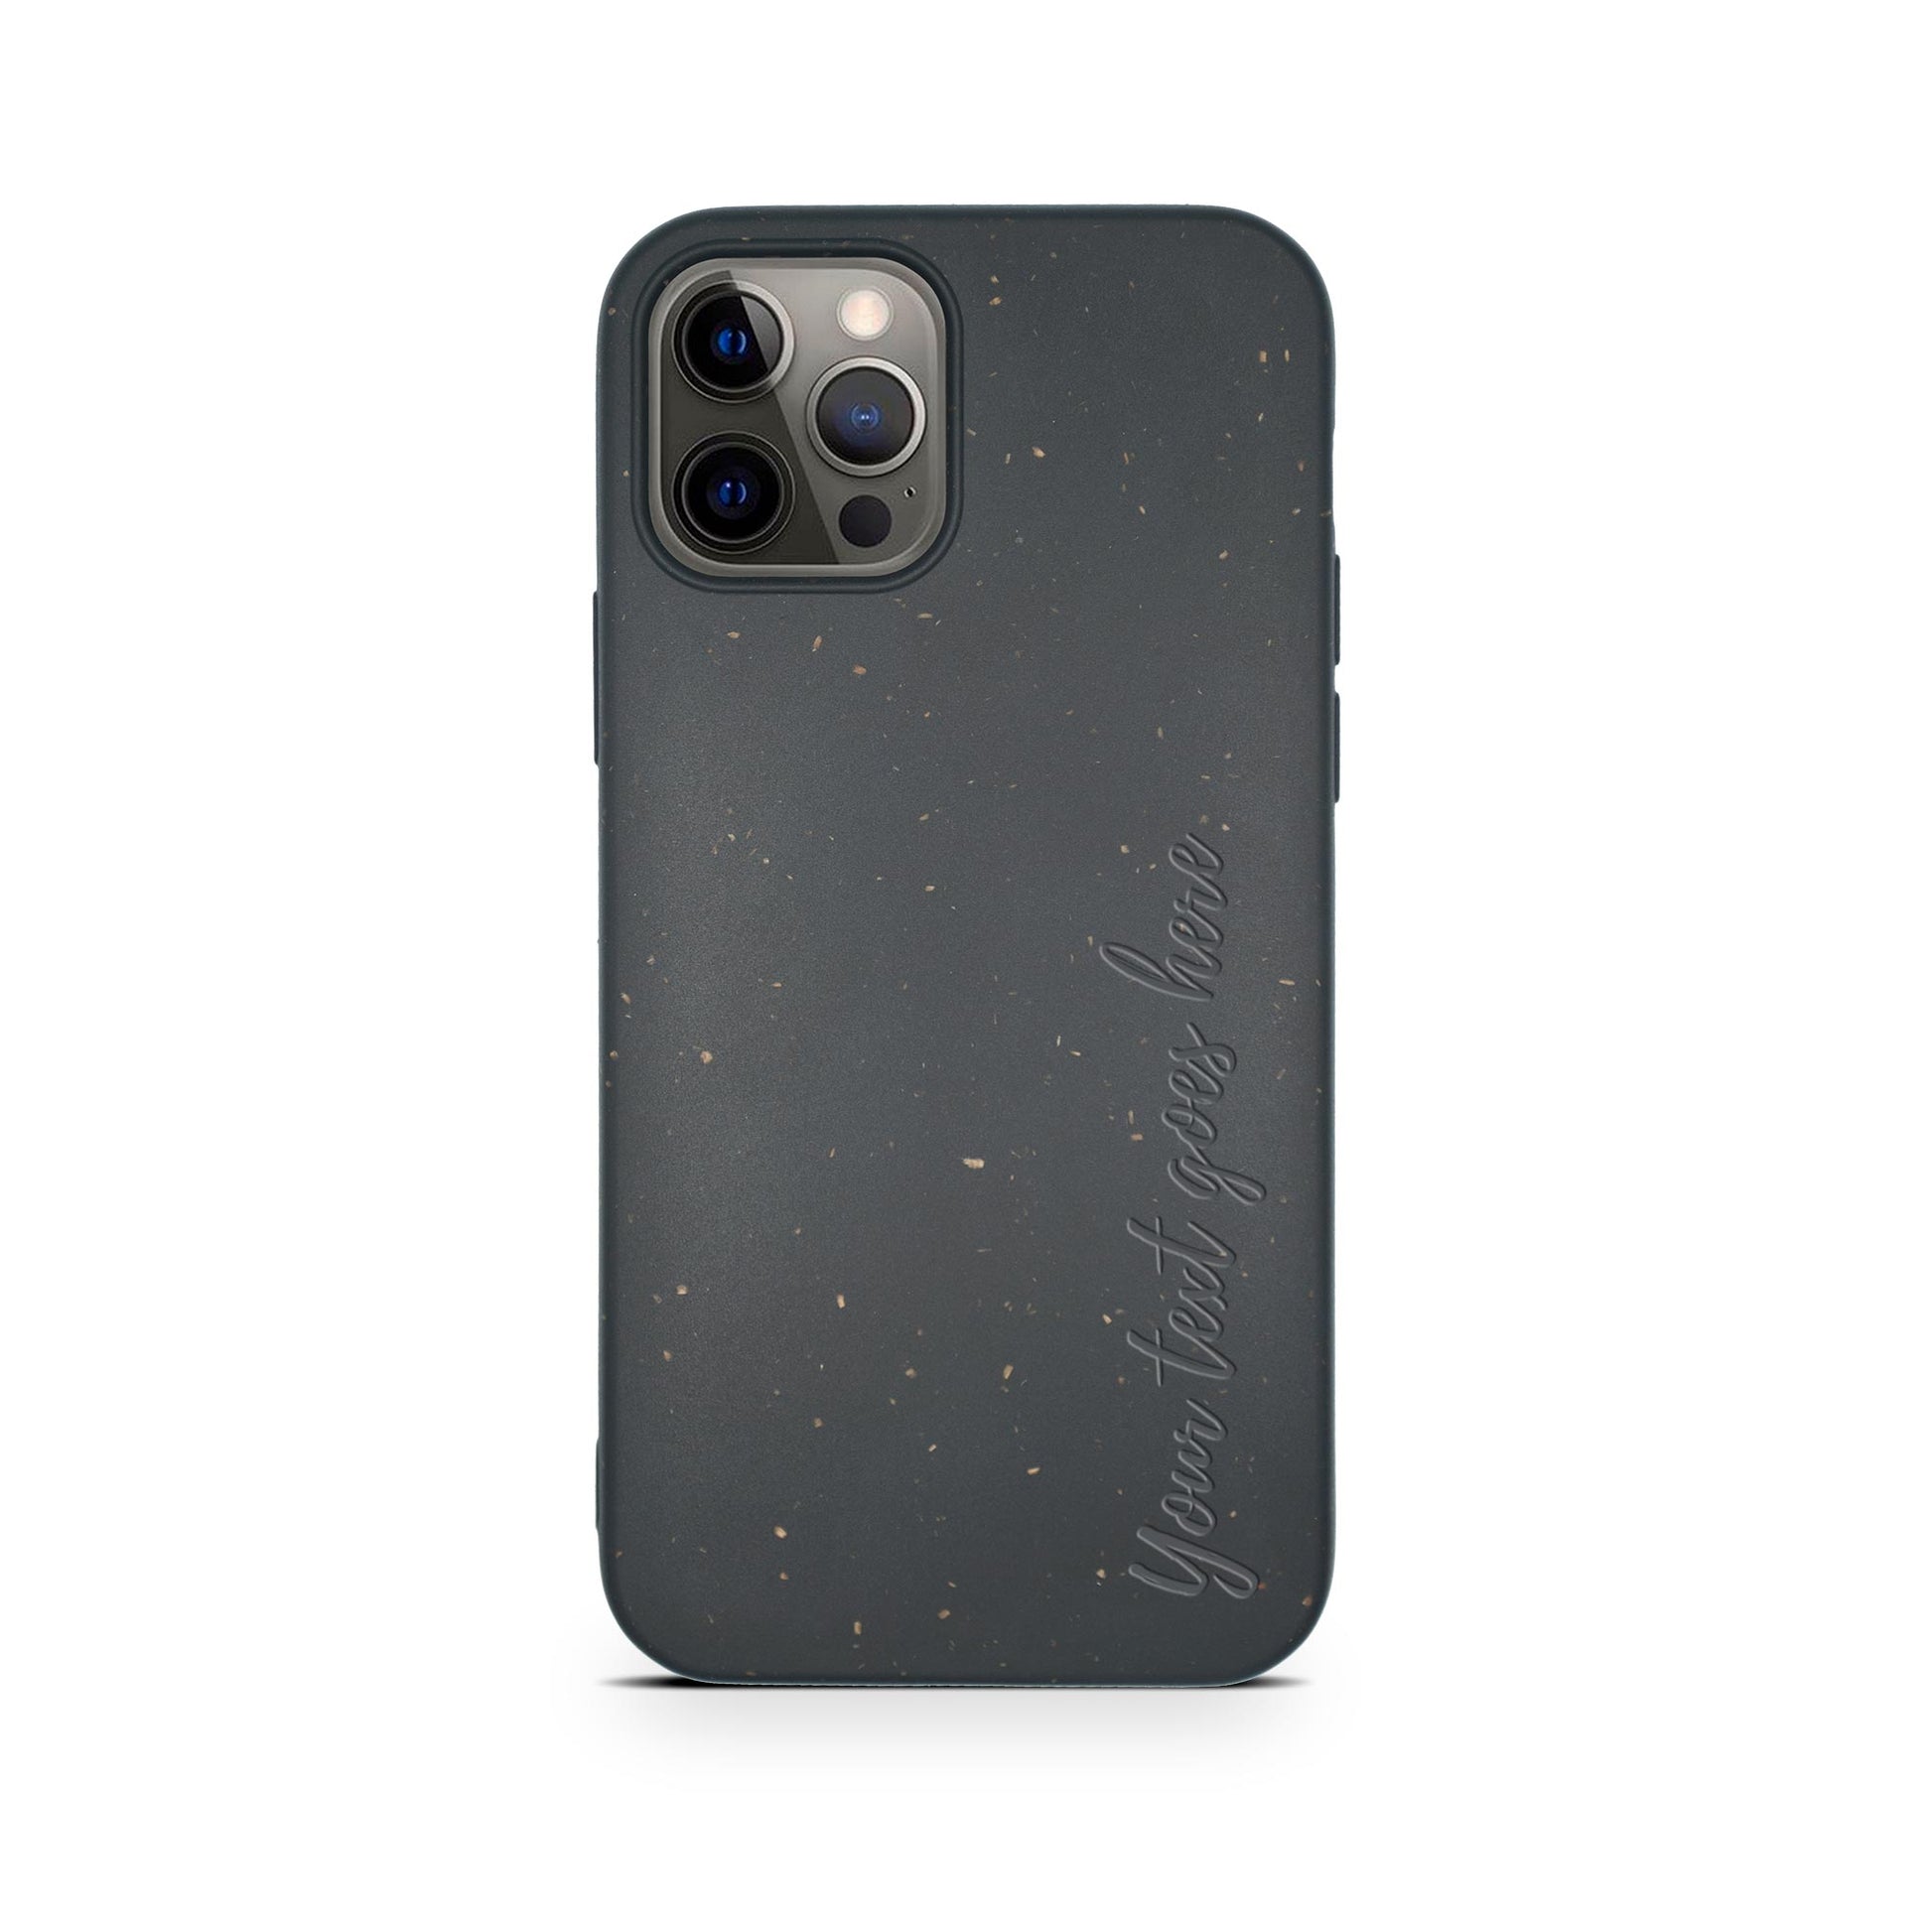 Biodegradable Personalized Iphone Case in Black by Tan Lily with gold speckles and script writing, featuring a triple-lens camera.